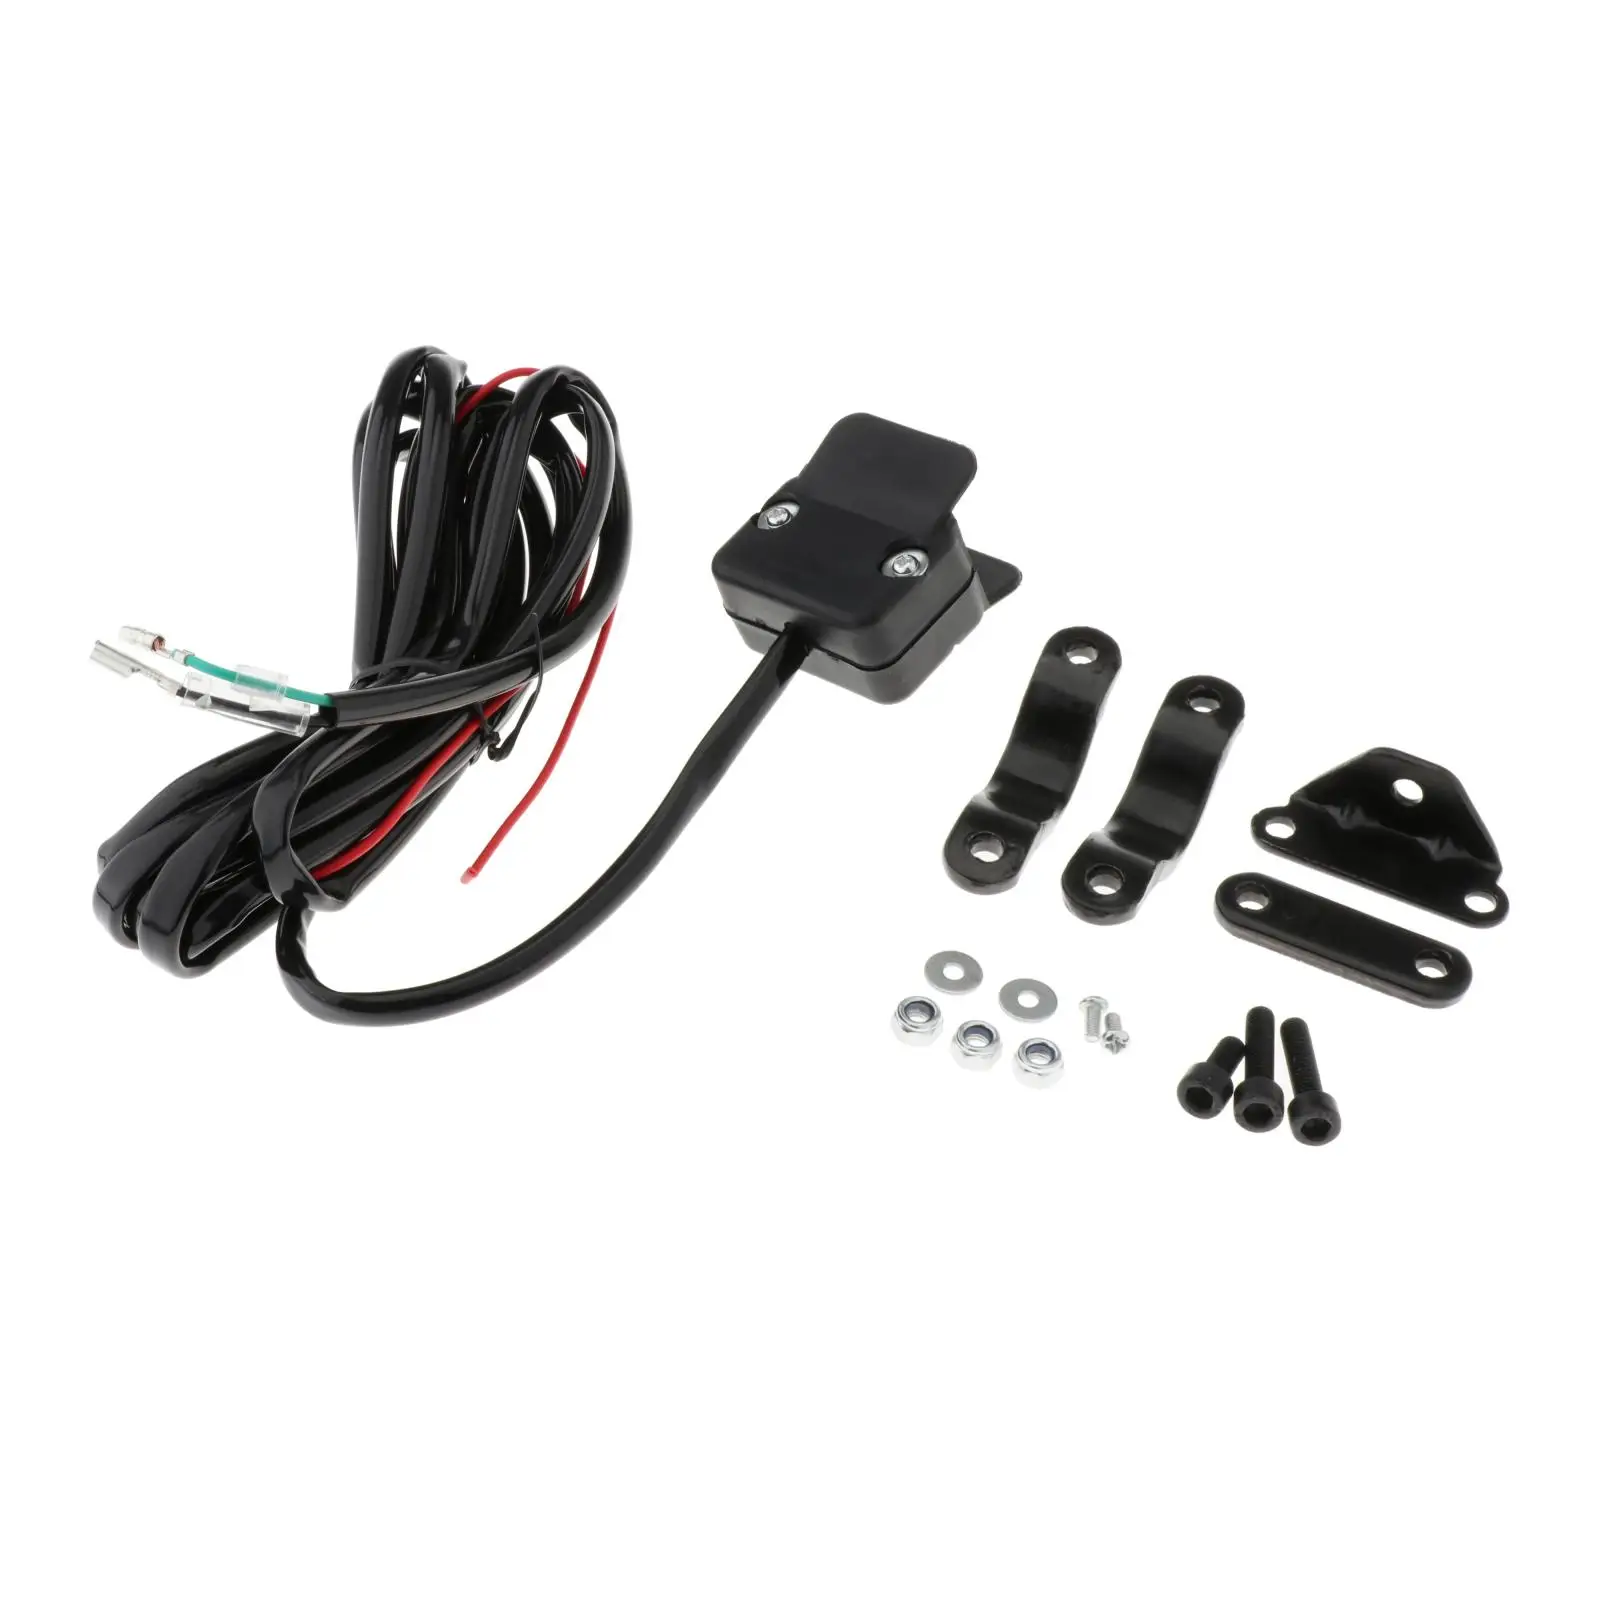 12V Winch Rocker Thumb Switch with Mounting Bracket Kit Replacement for ATV UTV